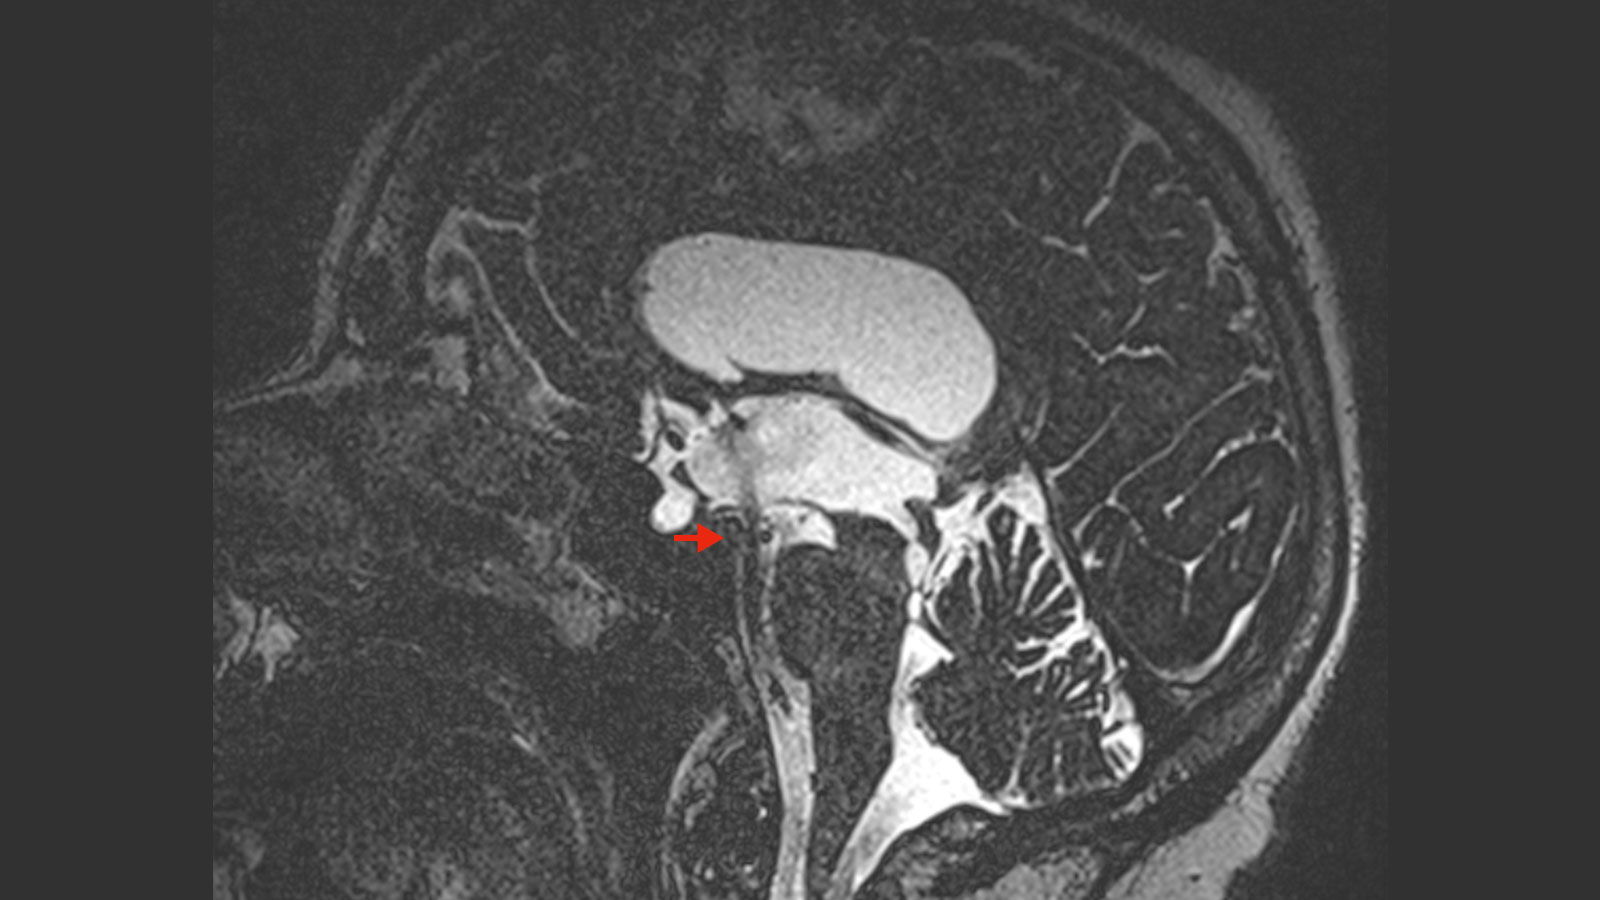 MRI image after surgery with clear flow signal